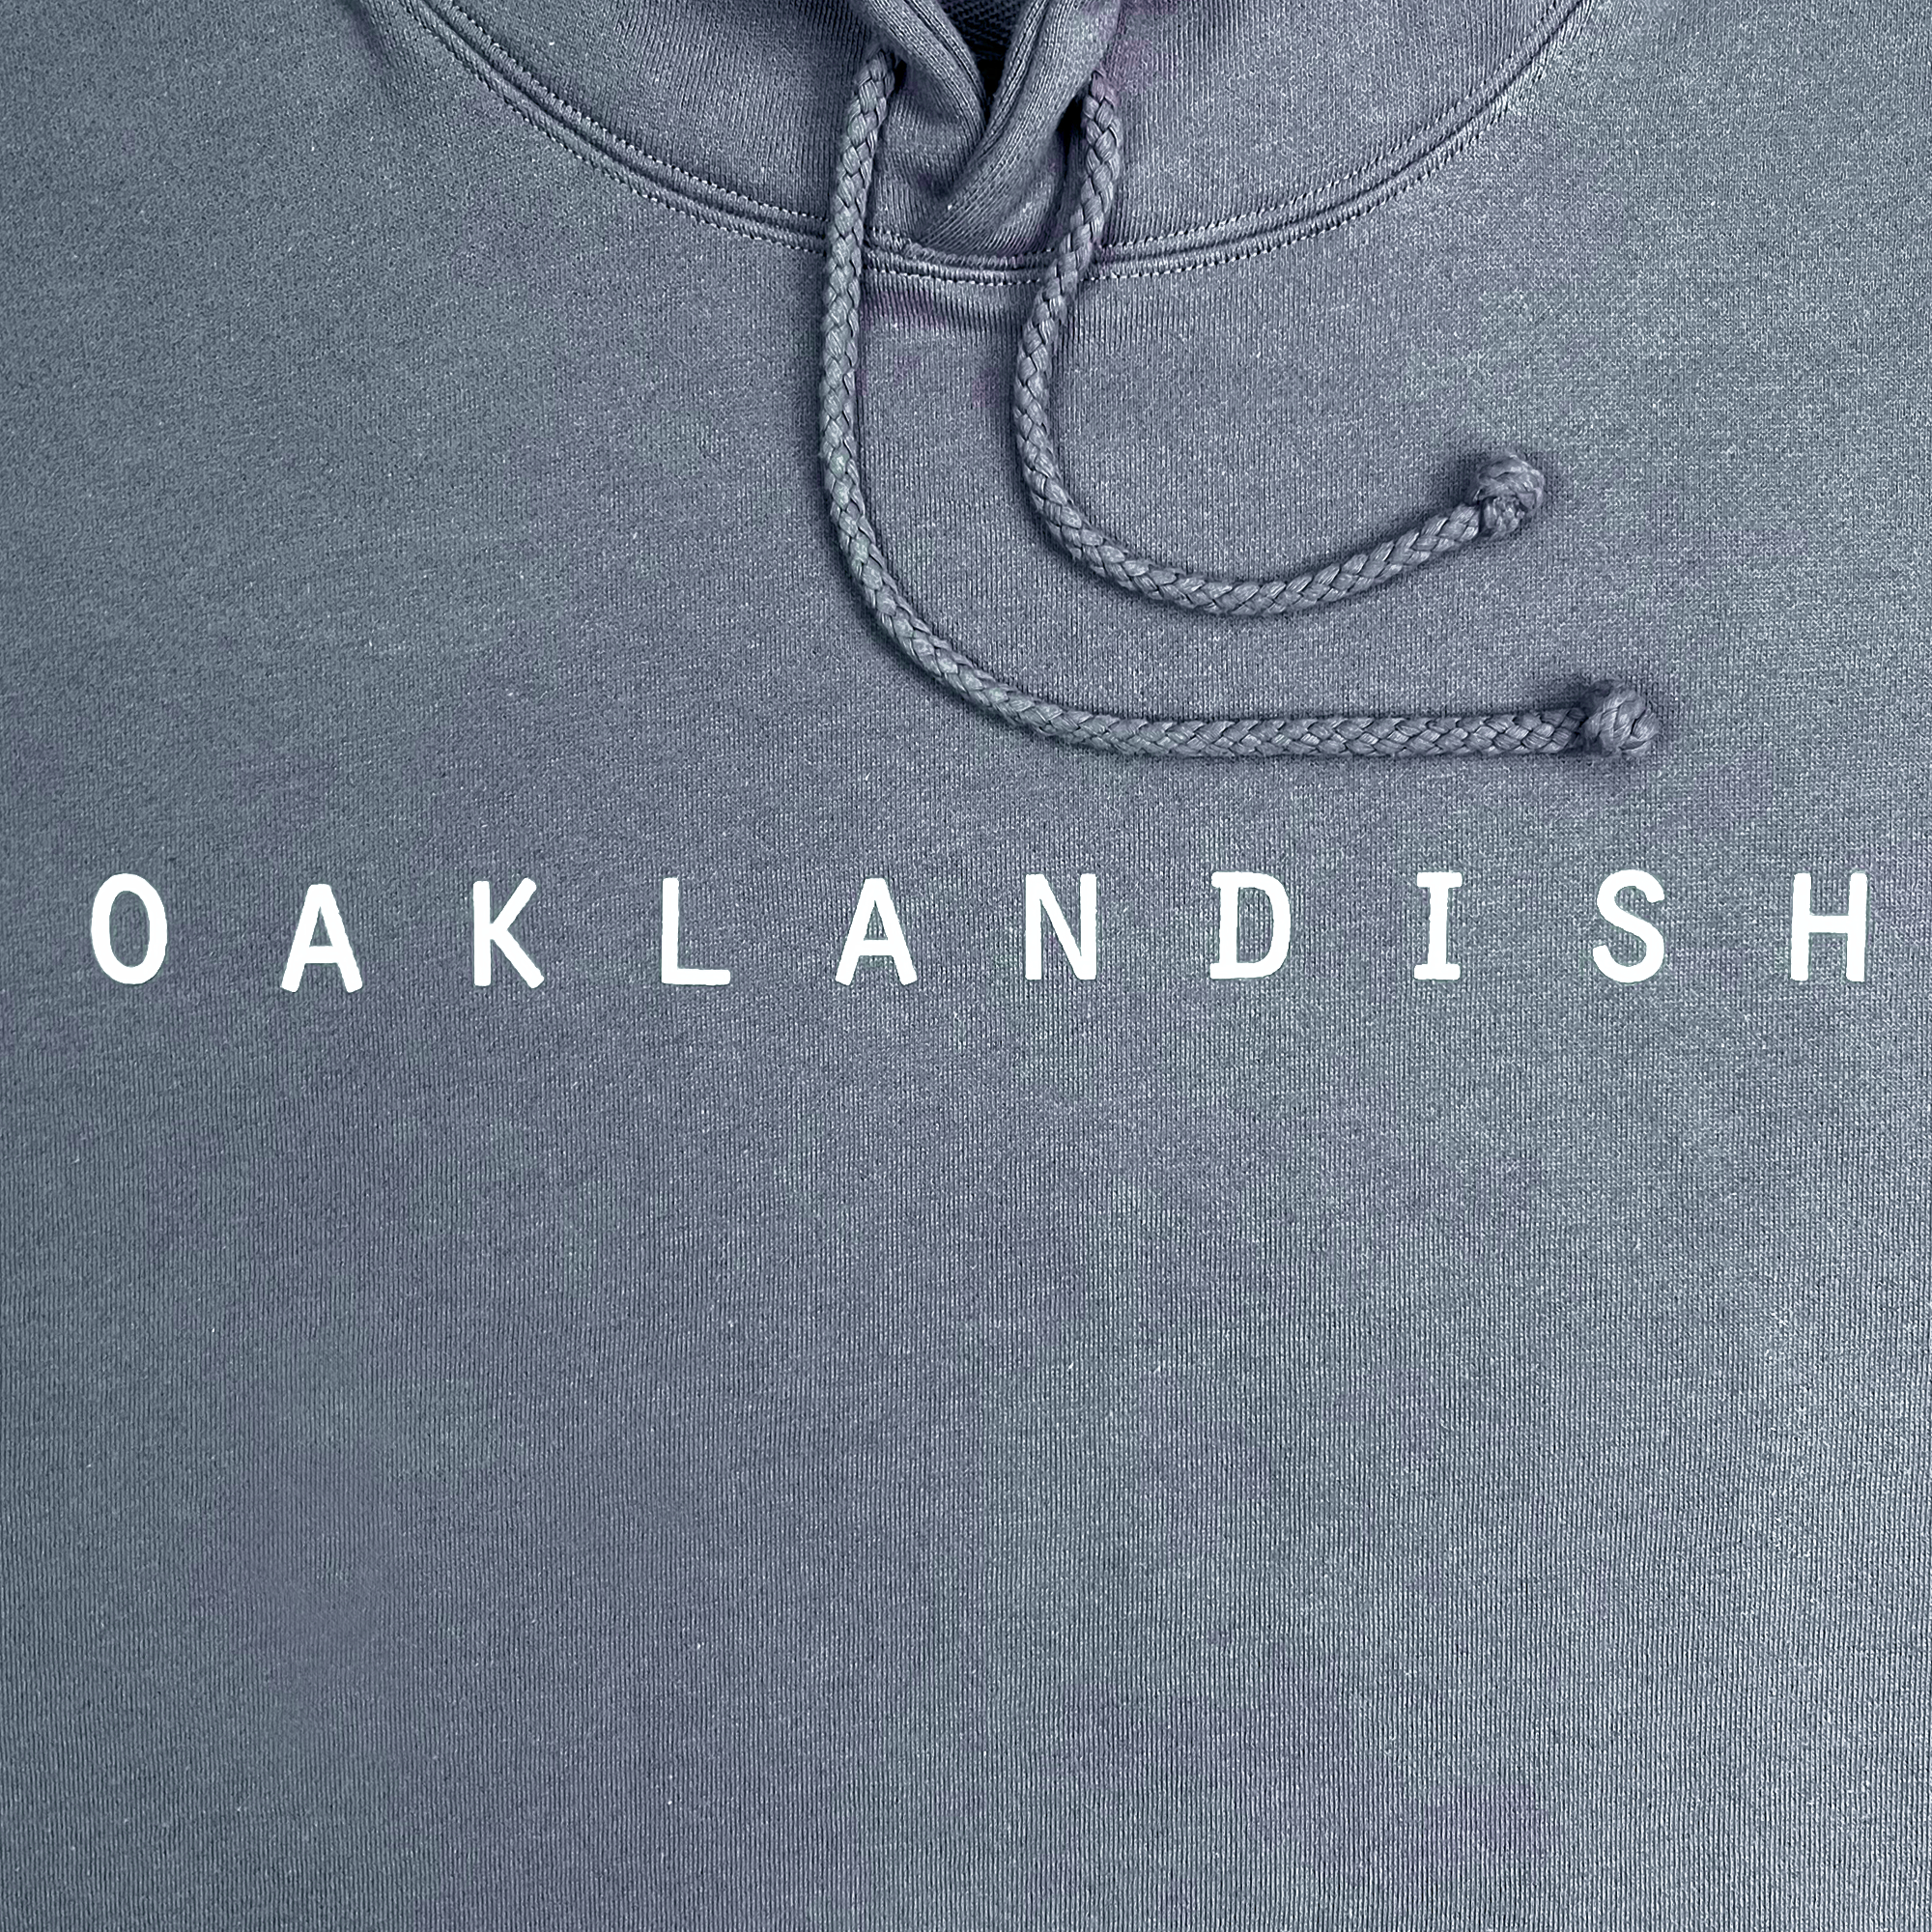 Detail front view of Premium pullover Hoodie - Classic Oaklandish, Storm blue.